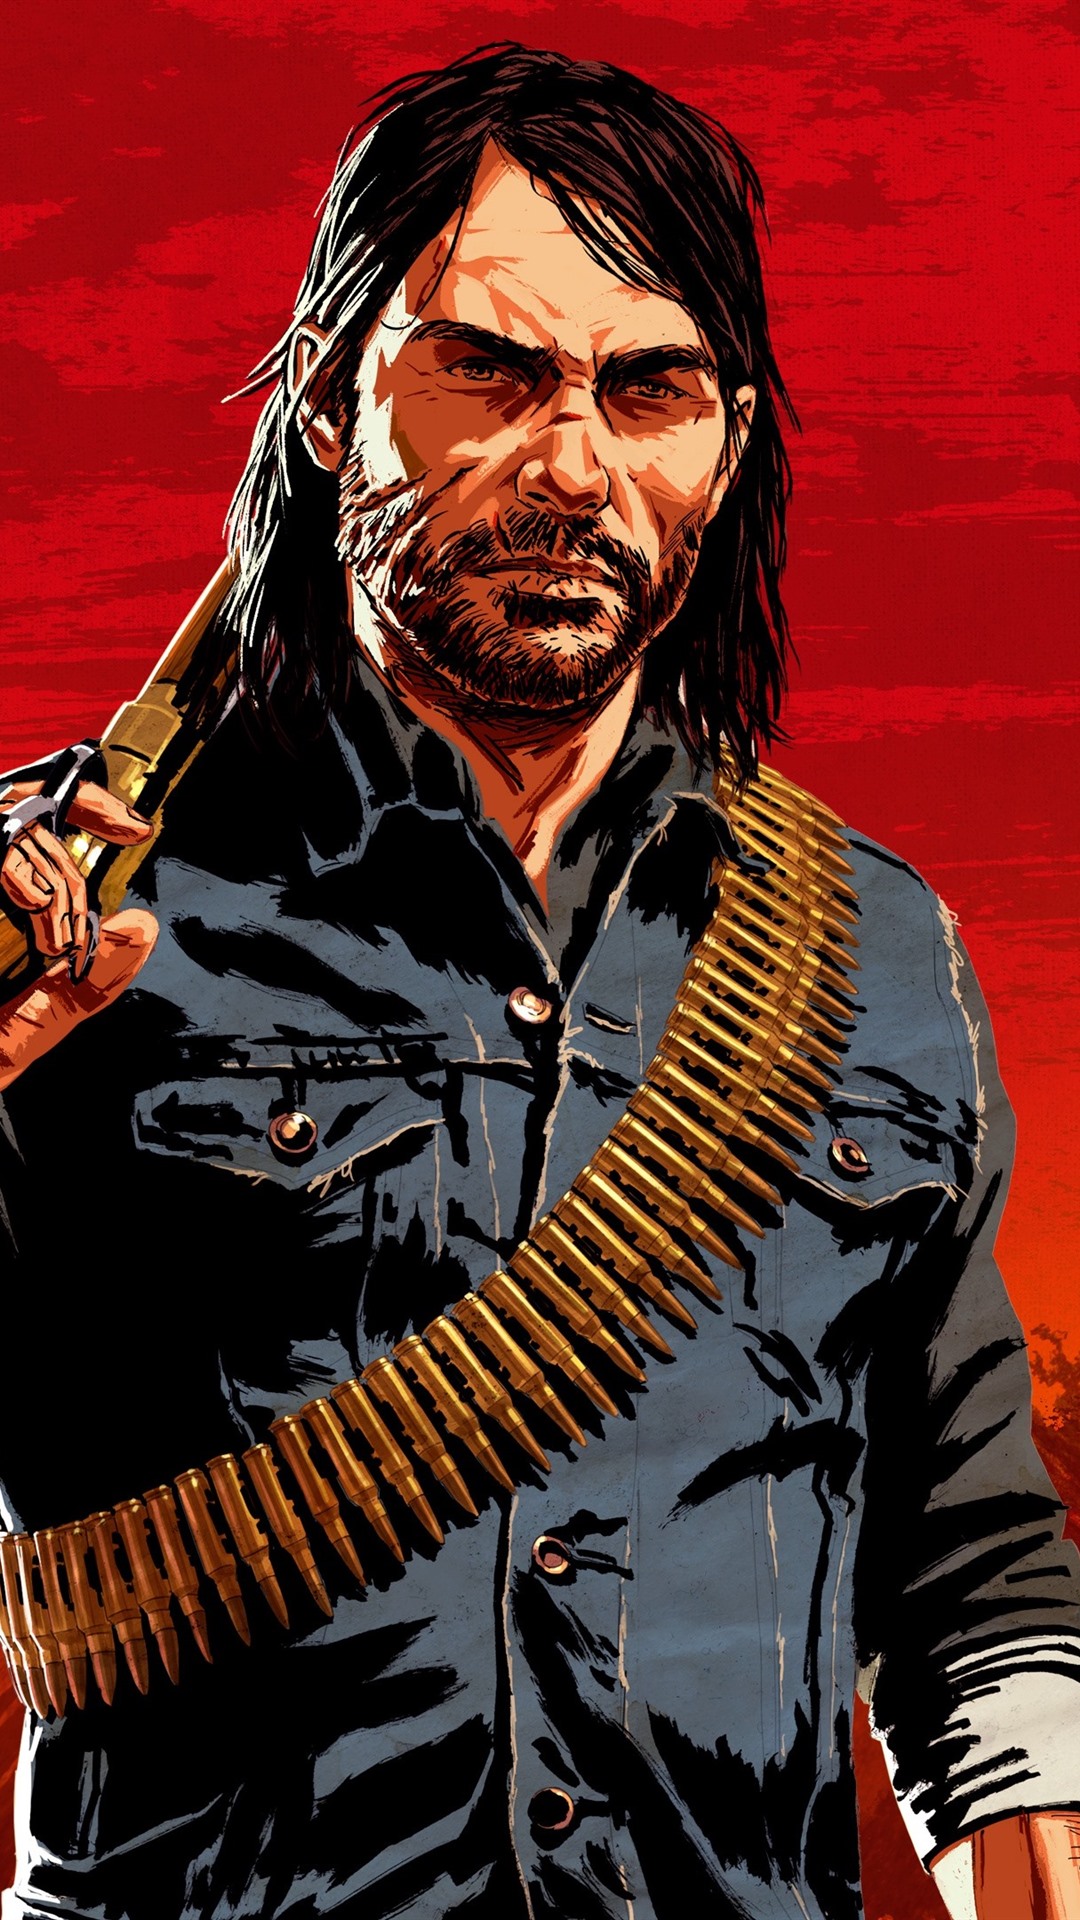 Iphone Wallpaper Red Dead Redemption 2, Video Game - John Marston Red